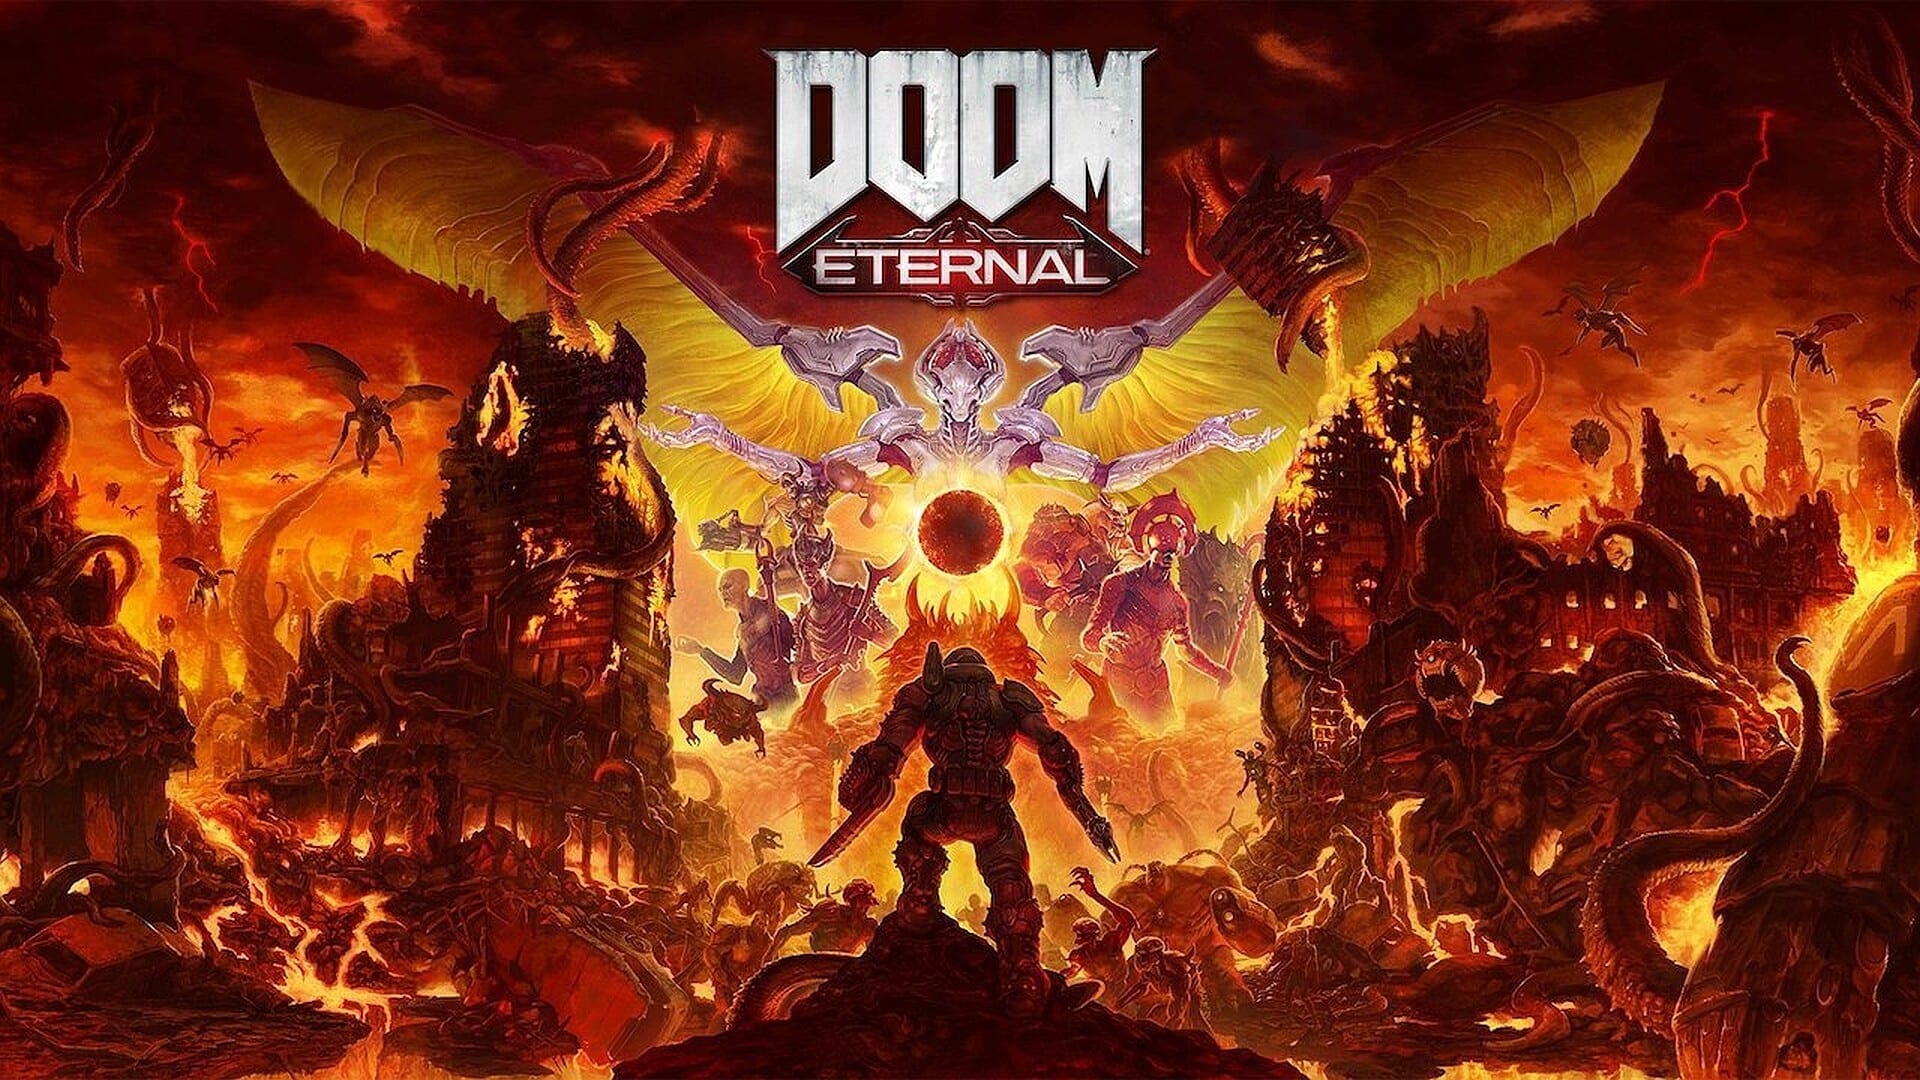 DOOM Eternal Available Now On PC, PlayStation 4 and Xbox One